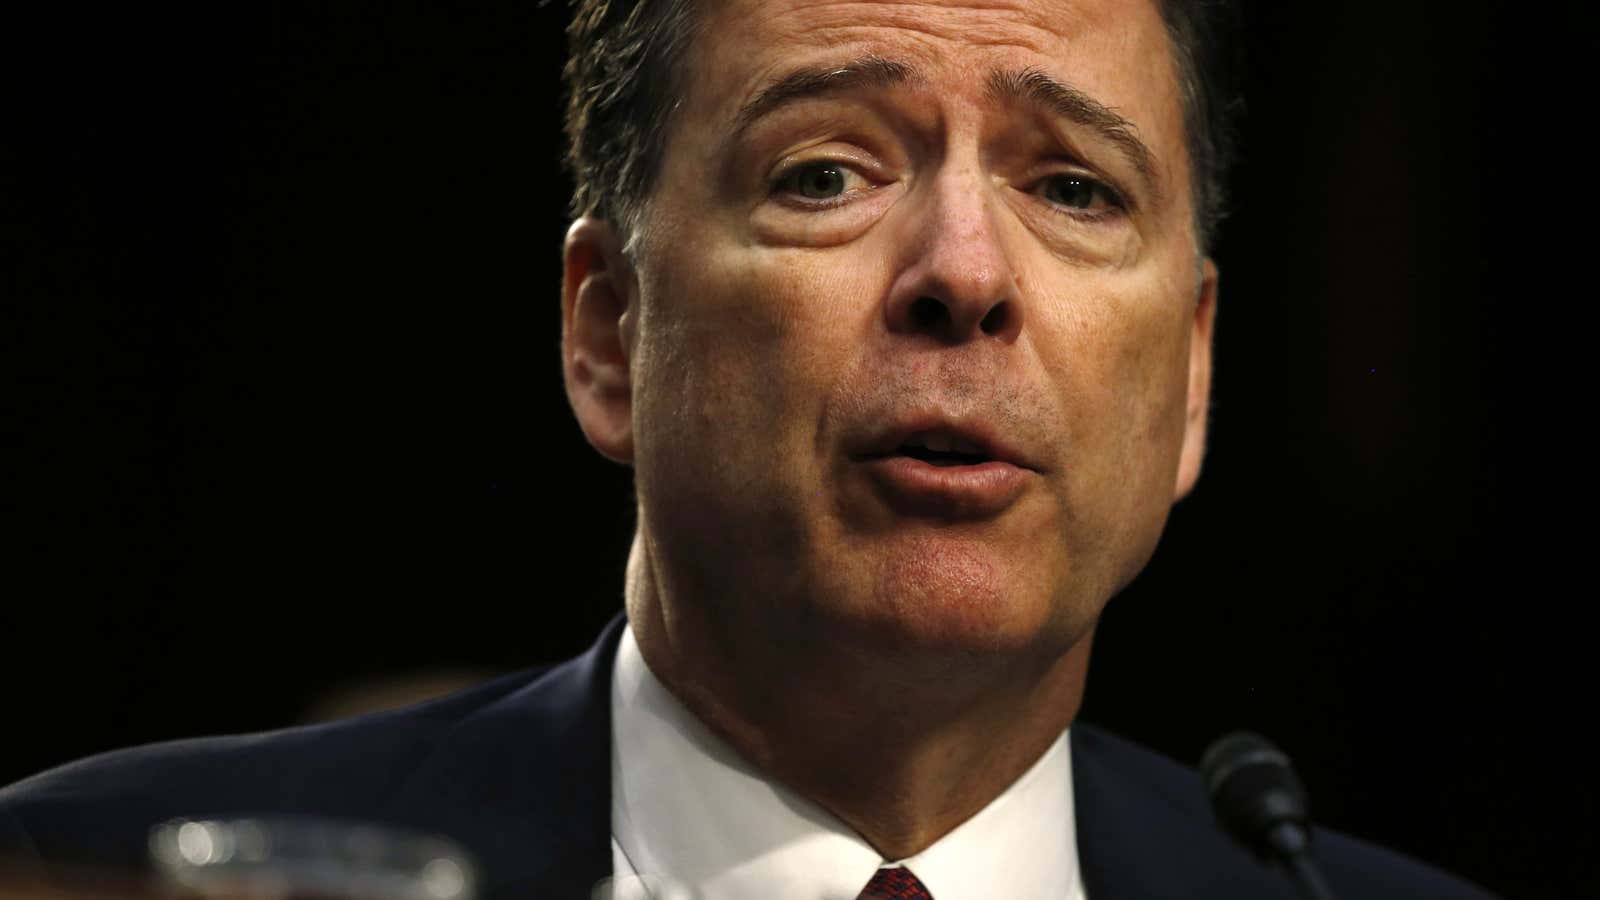 James Comey is not an expert in ethics.